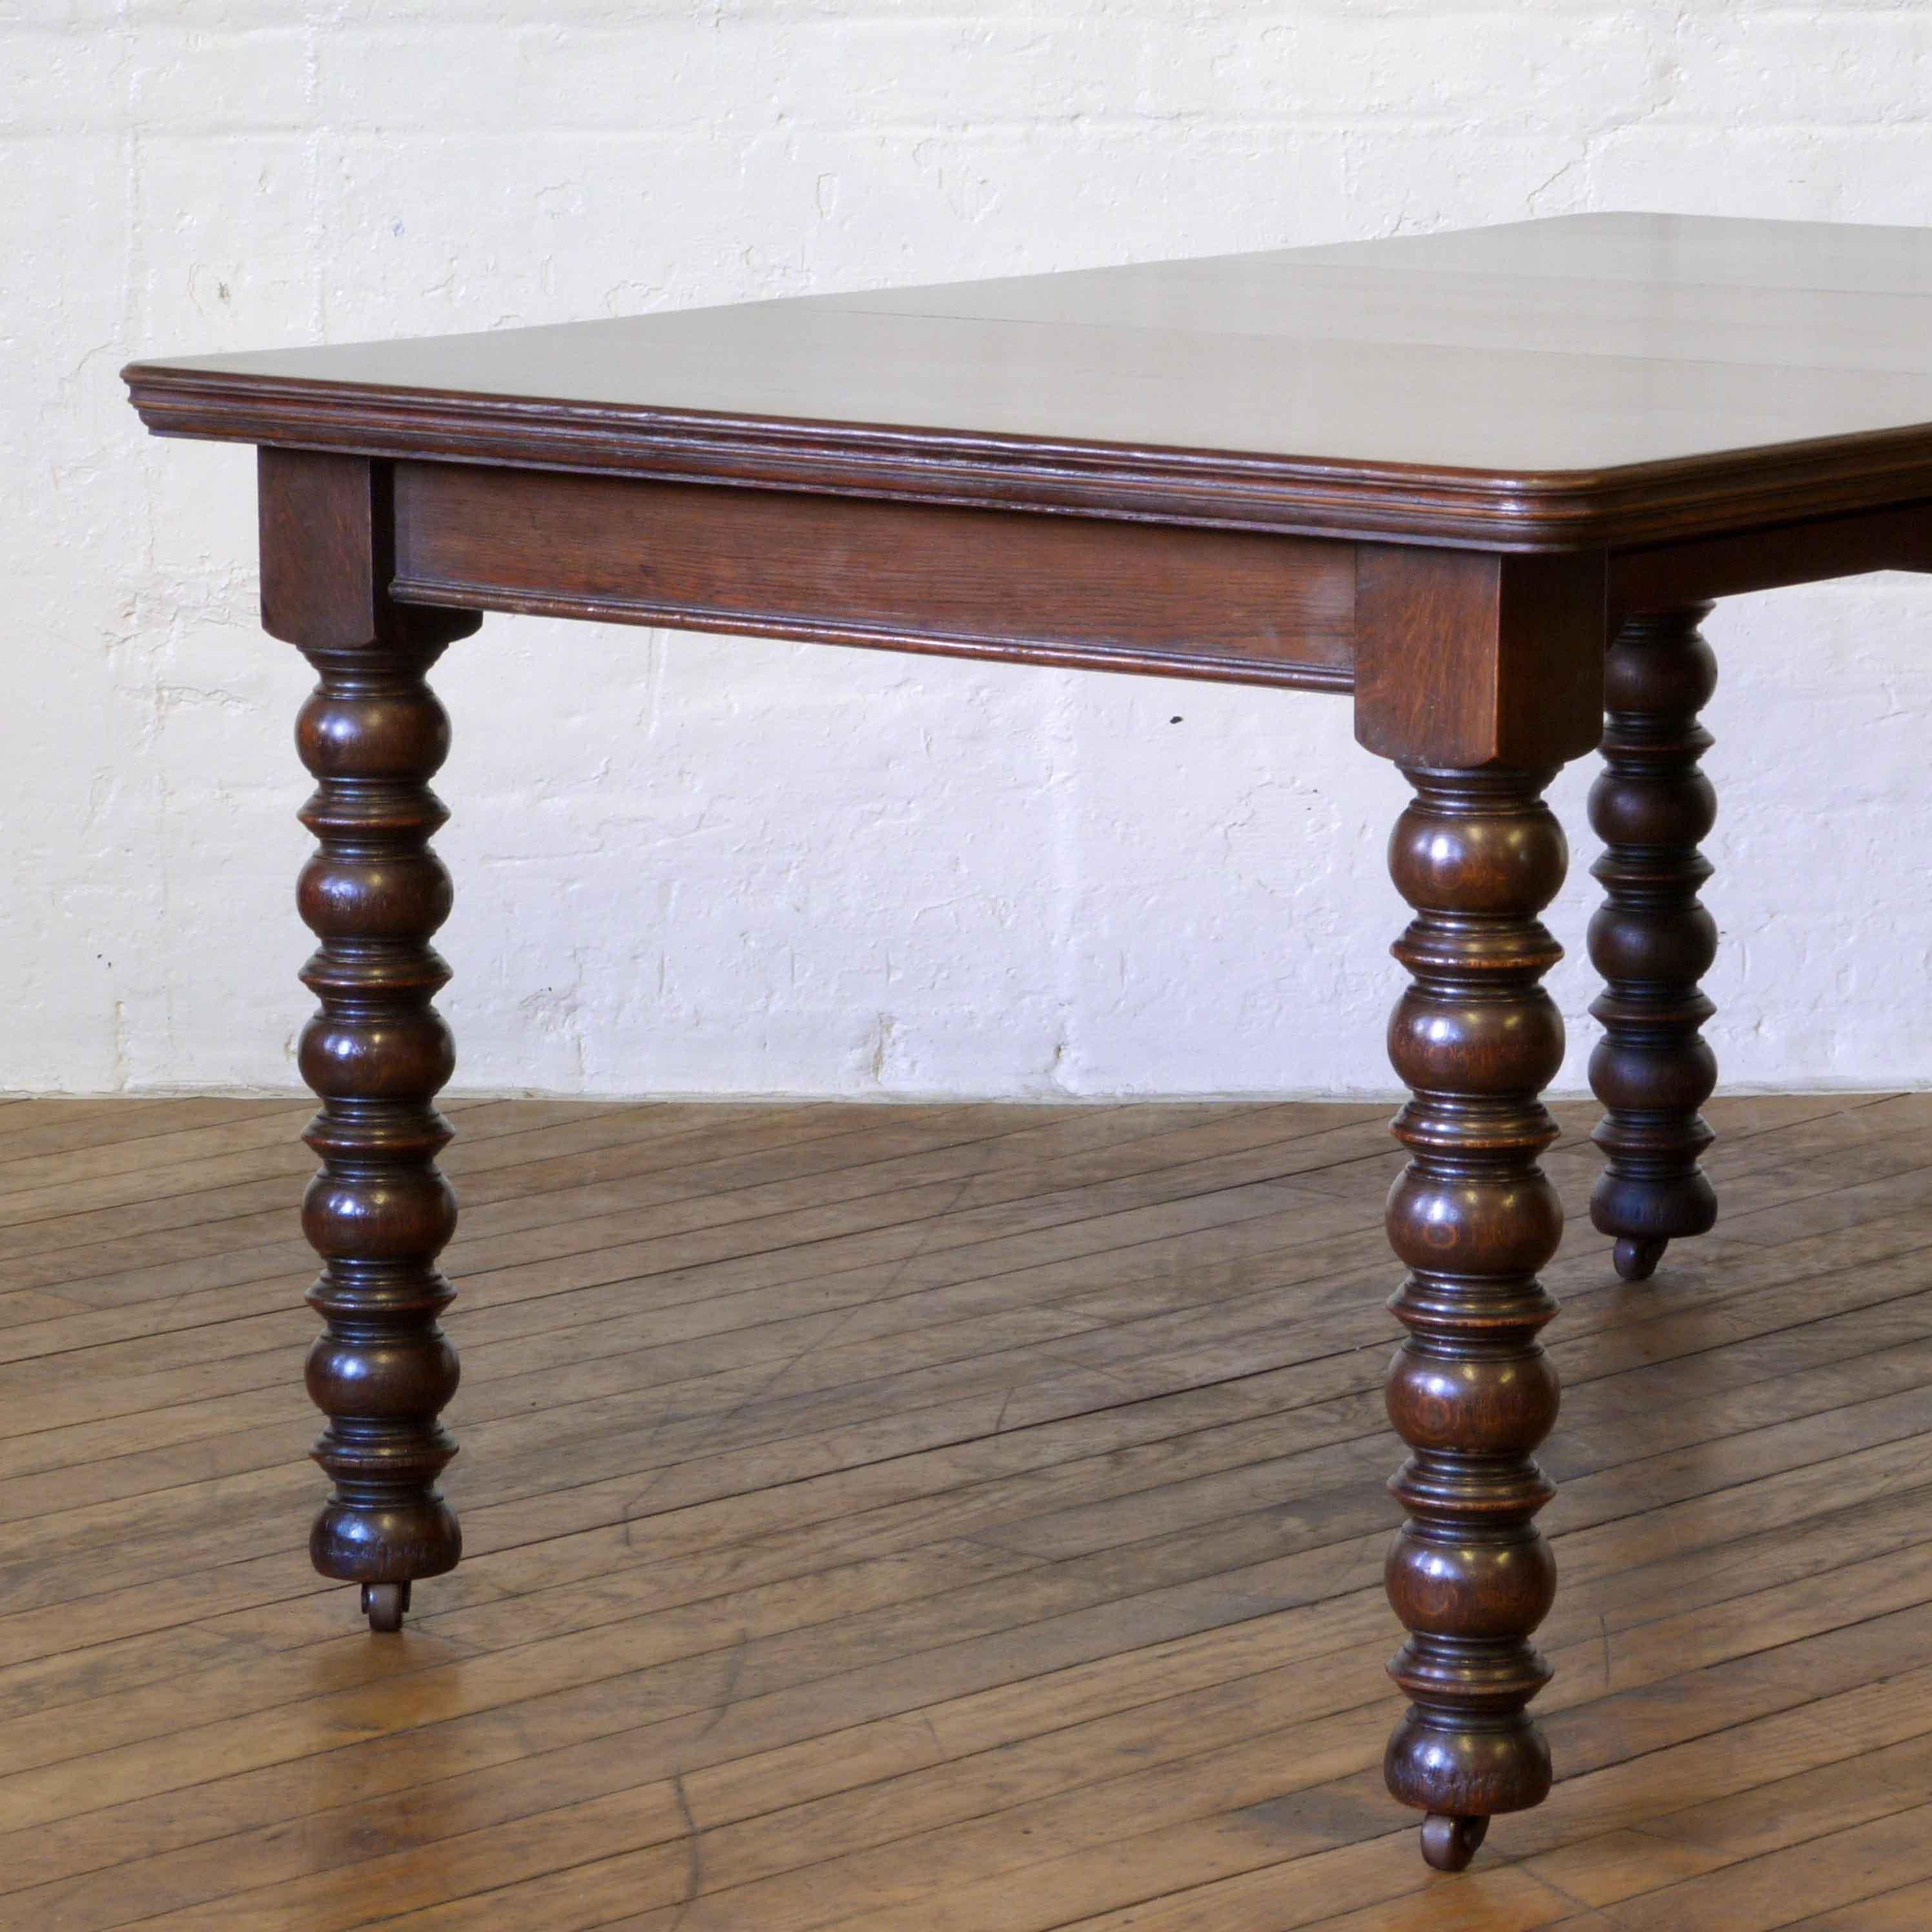 An attractive solid oak dining table. Perfect for six chairs when extended and four when closed. The bobbin legs are crisply turned and still retain their original castors. The winding mechanism allows you to take out the leaf and close the table